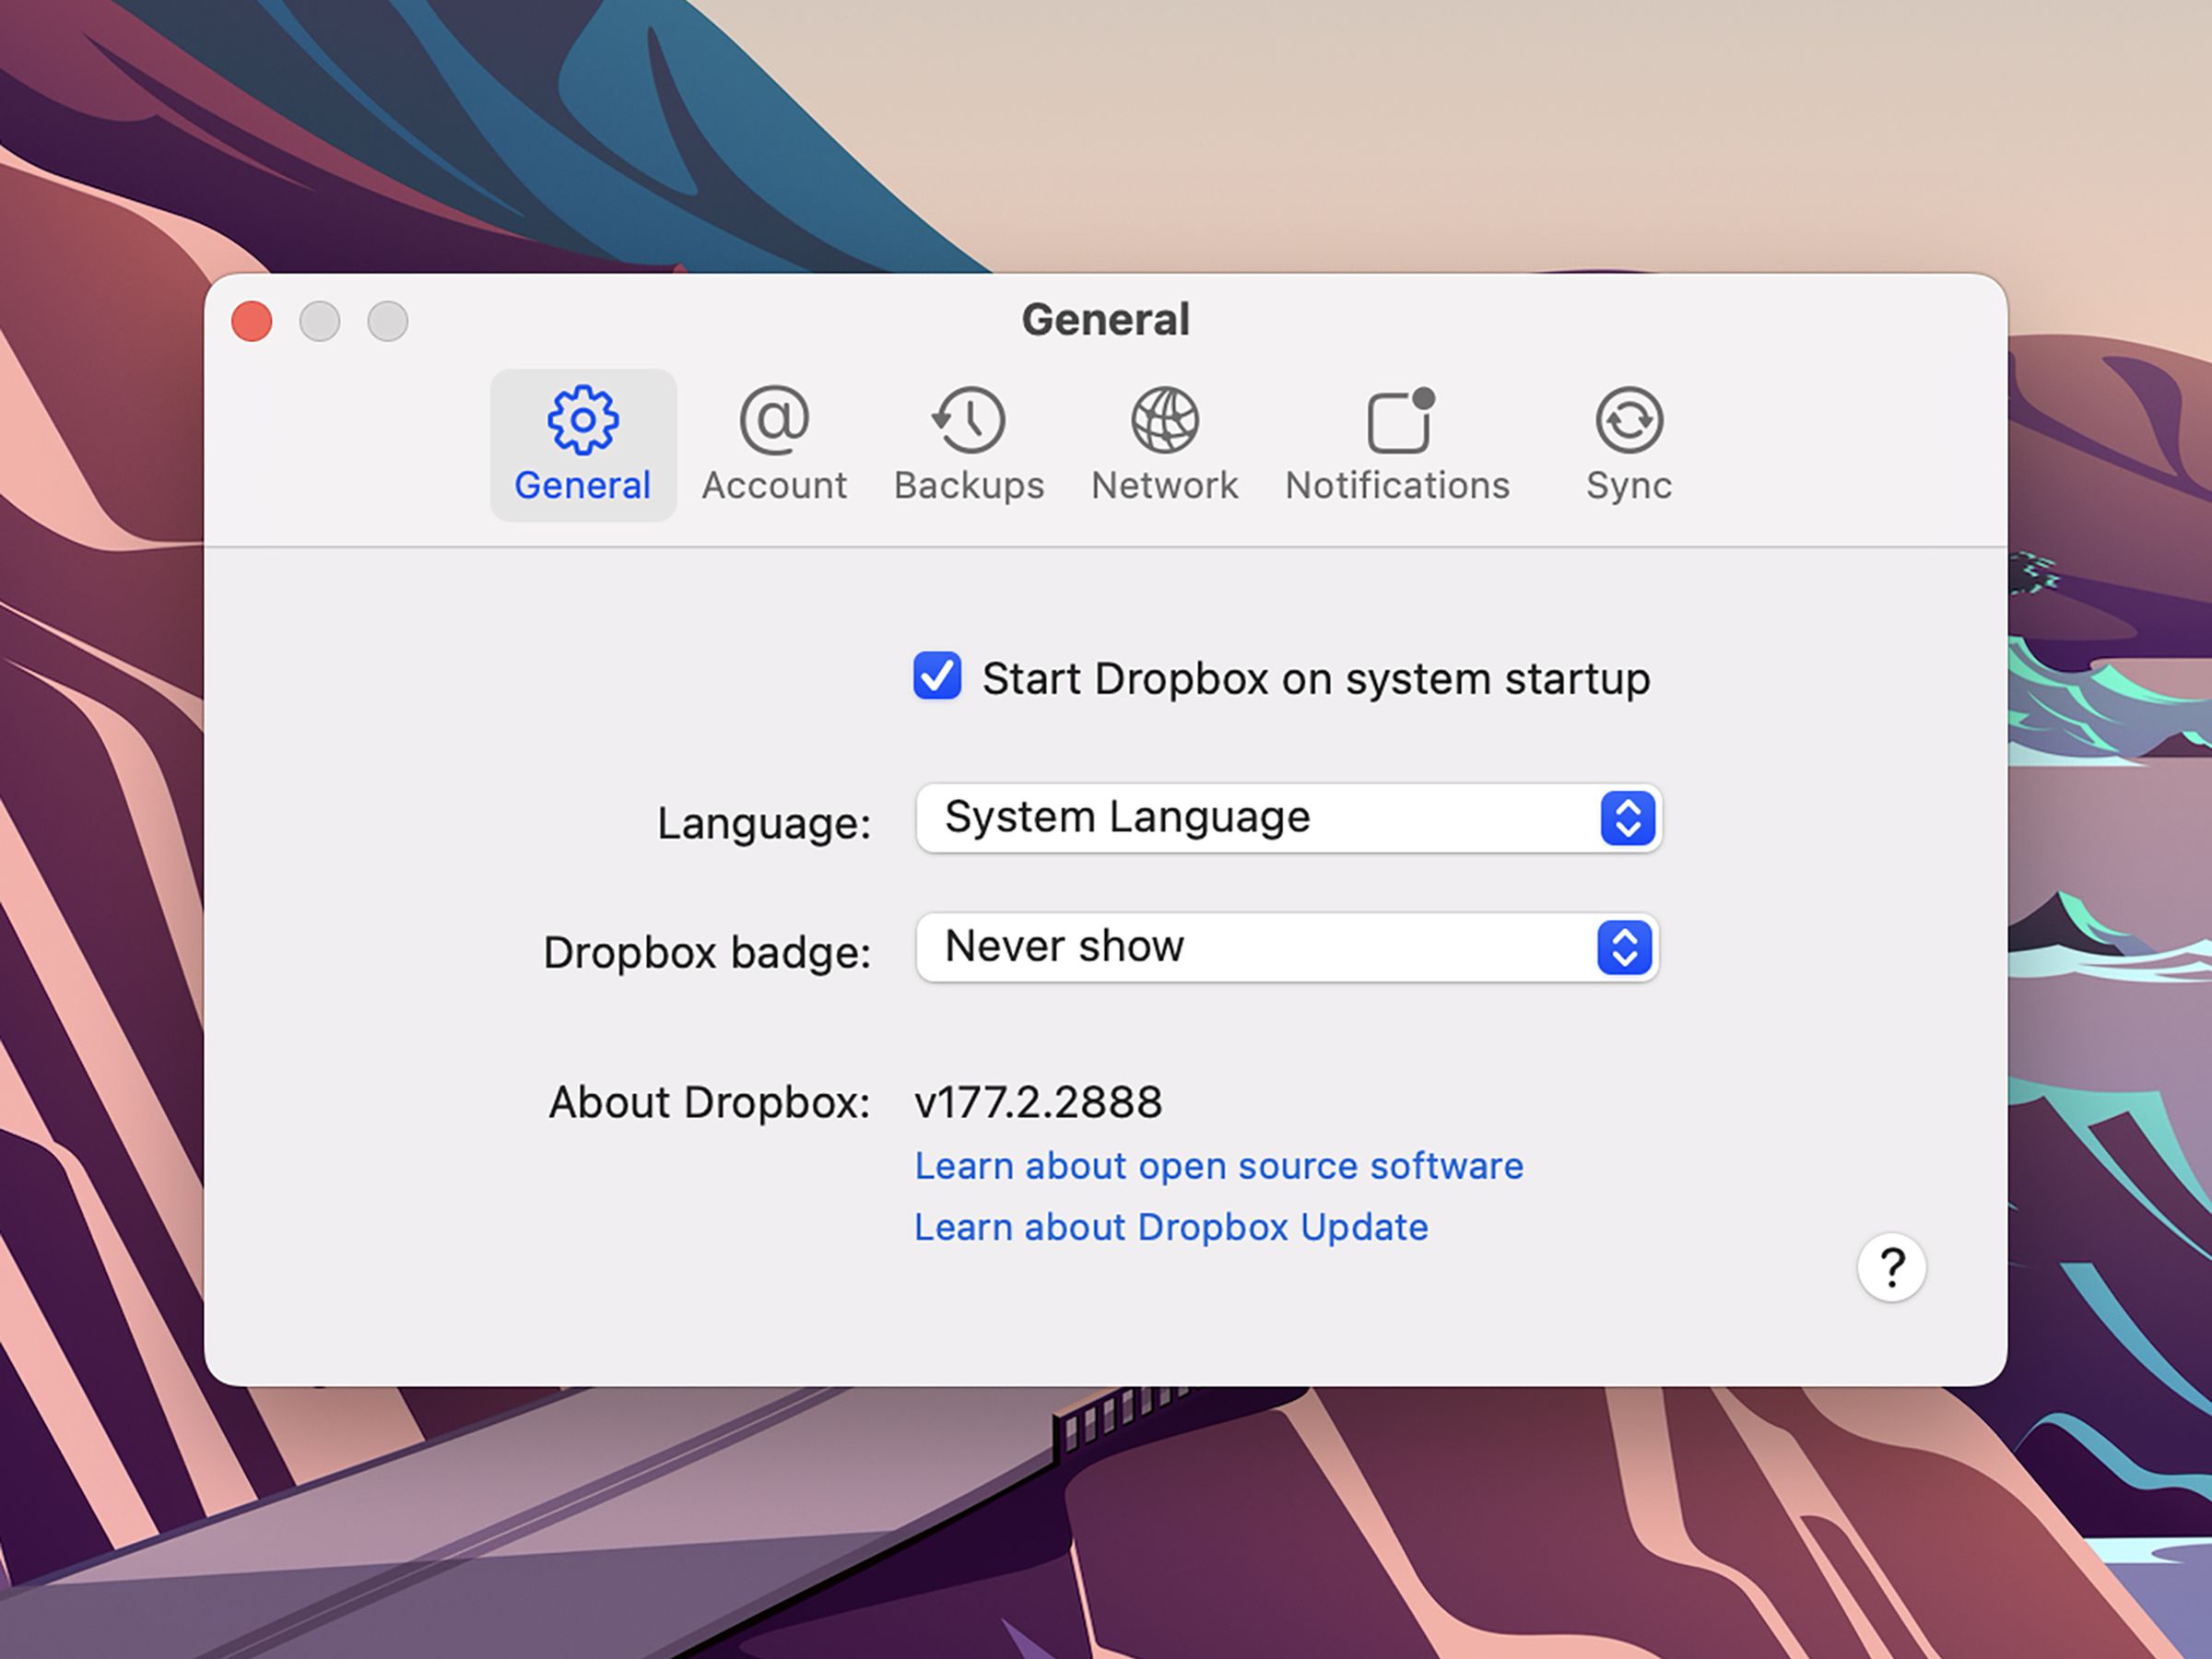 Window labeled General, with several icons below including General, Account, Backups, etc., and below that a checkbox next to Start Dropbox on system startup, and down-down menu selections for language, dropbox badge.